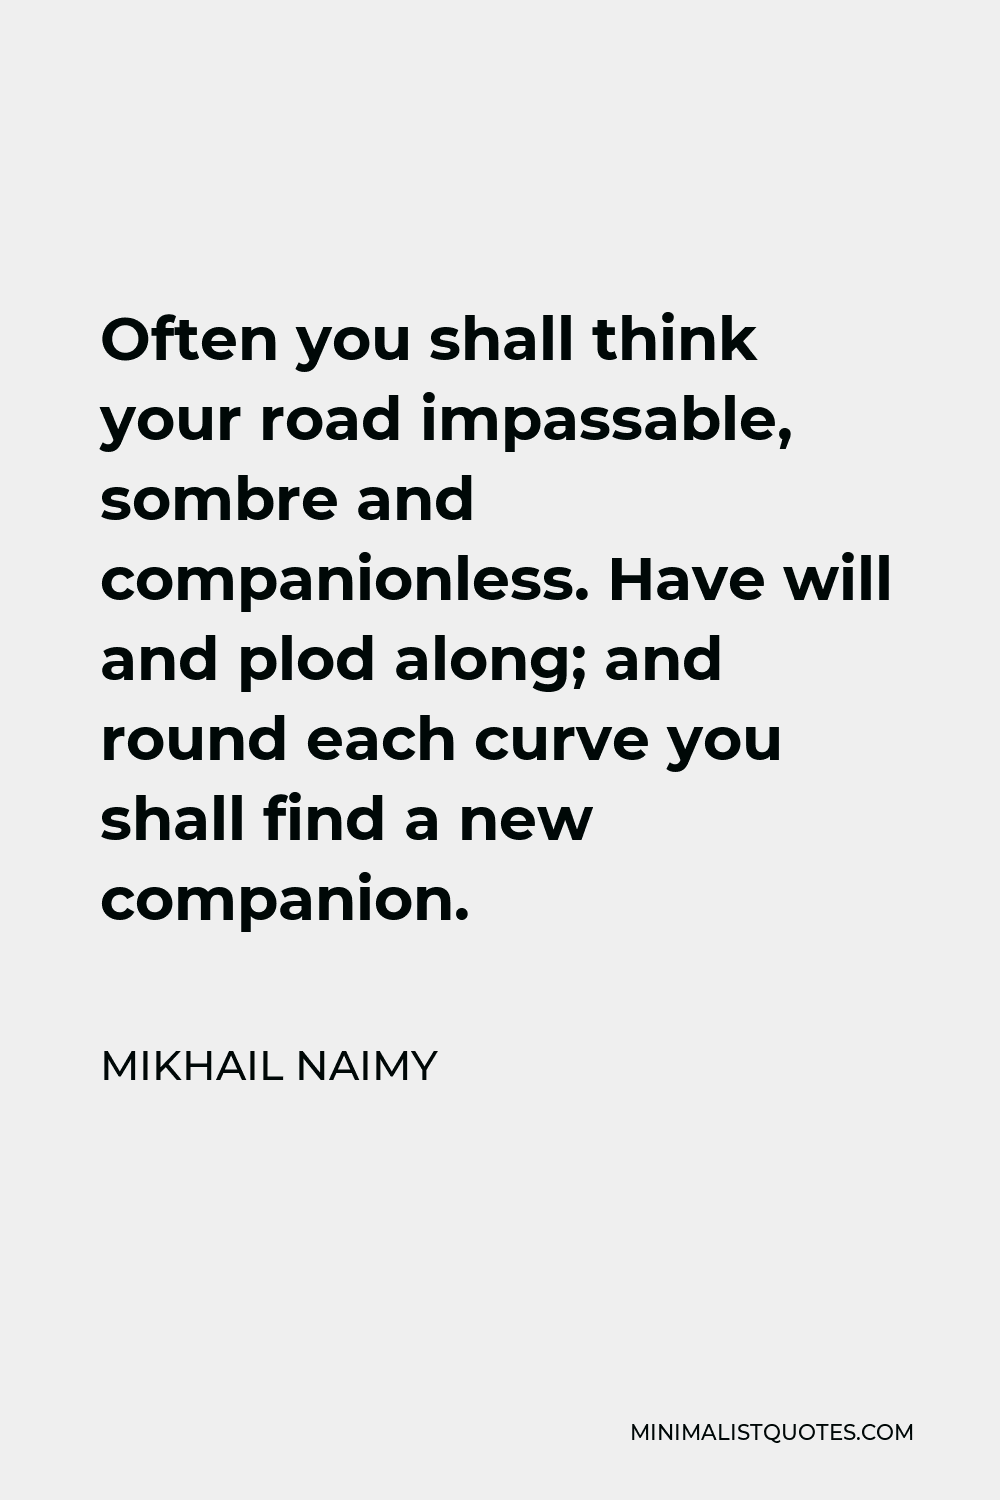 Mikhail Naimy Quote - Often you shall think your road impassable, sombre and companionless. Have will and plod along; and round each curve you shall find a new companion.